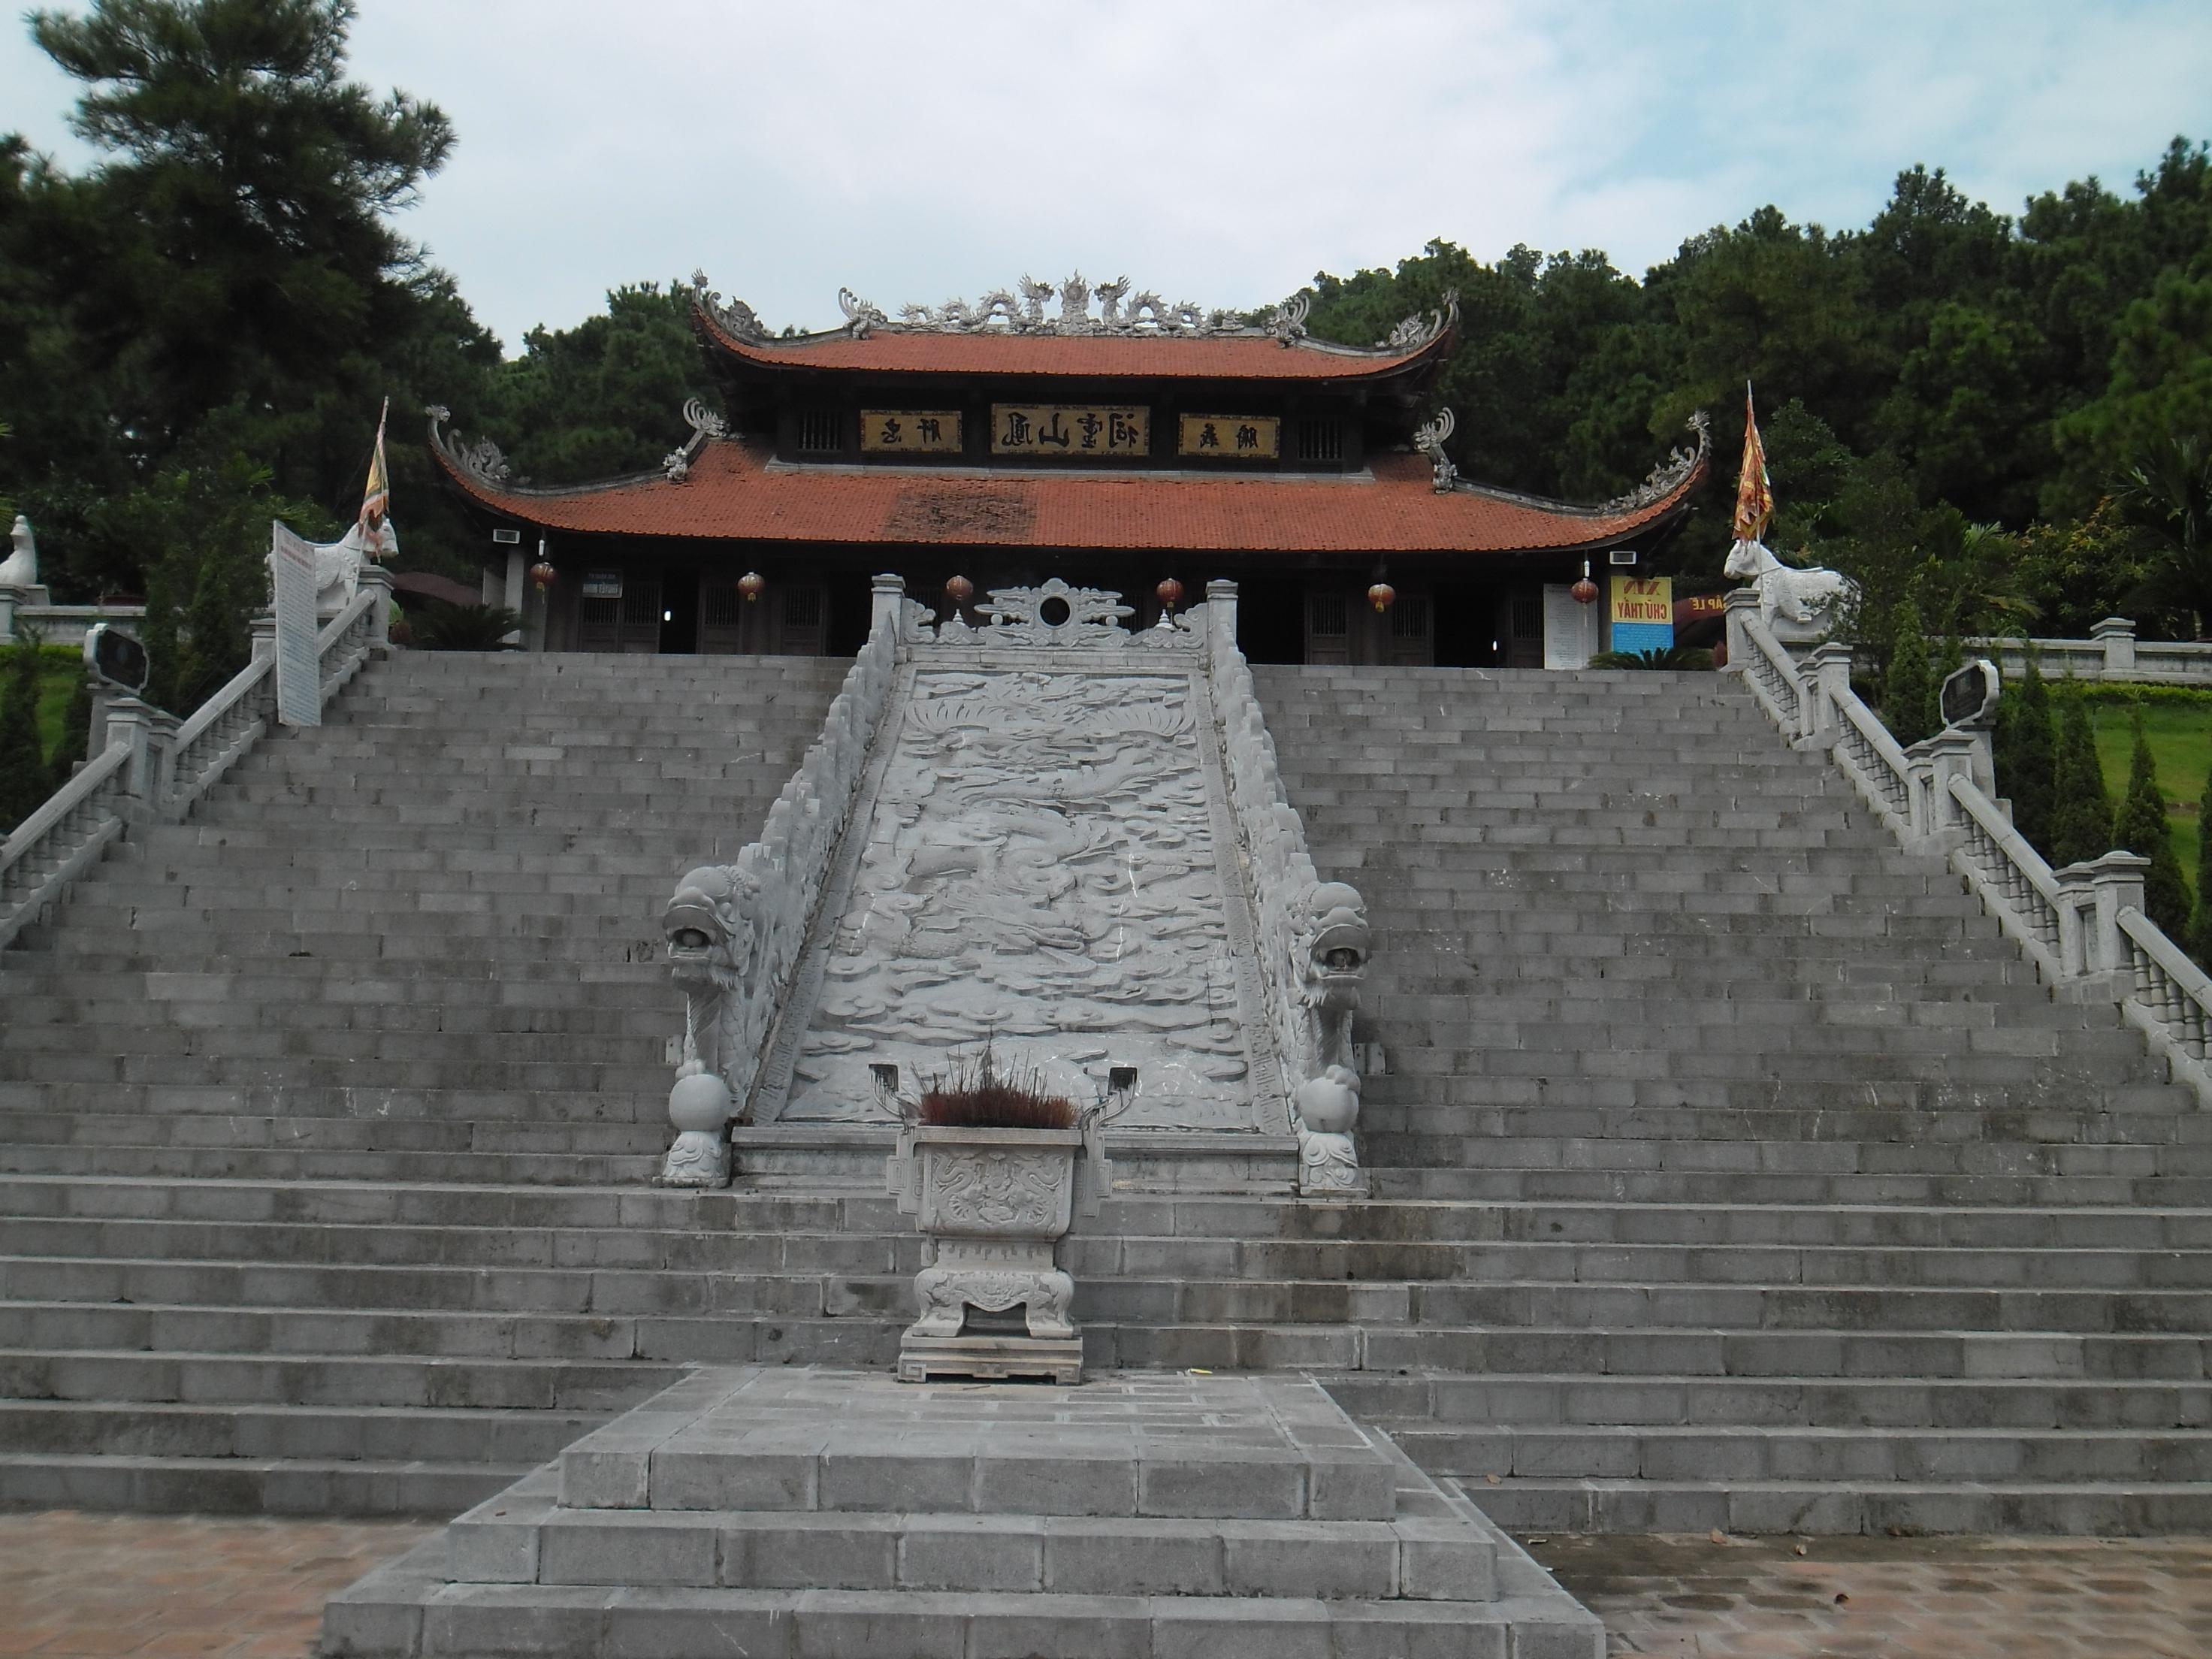  a picture of a temple worshiping Chu Van An